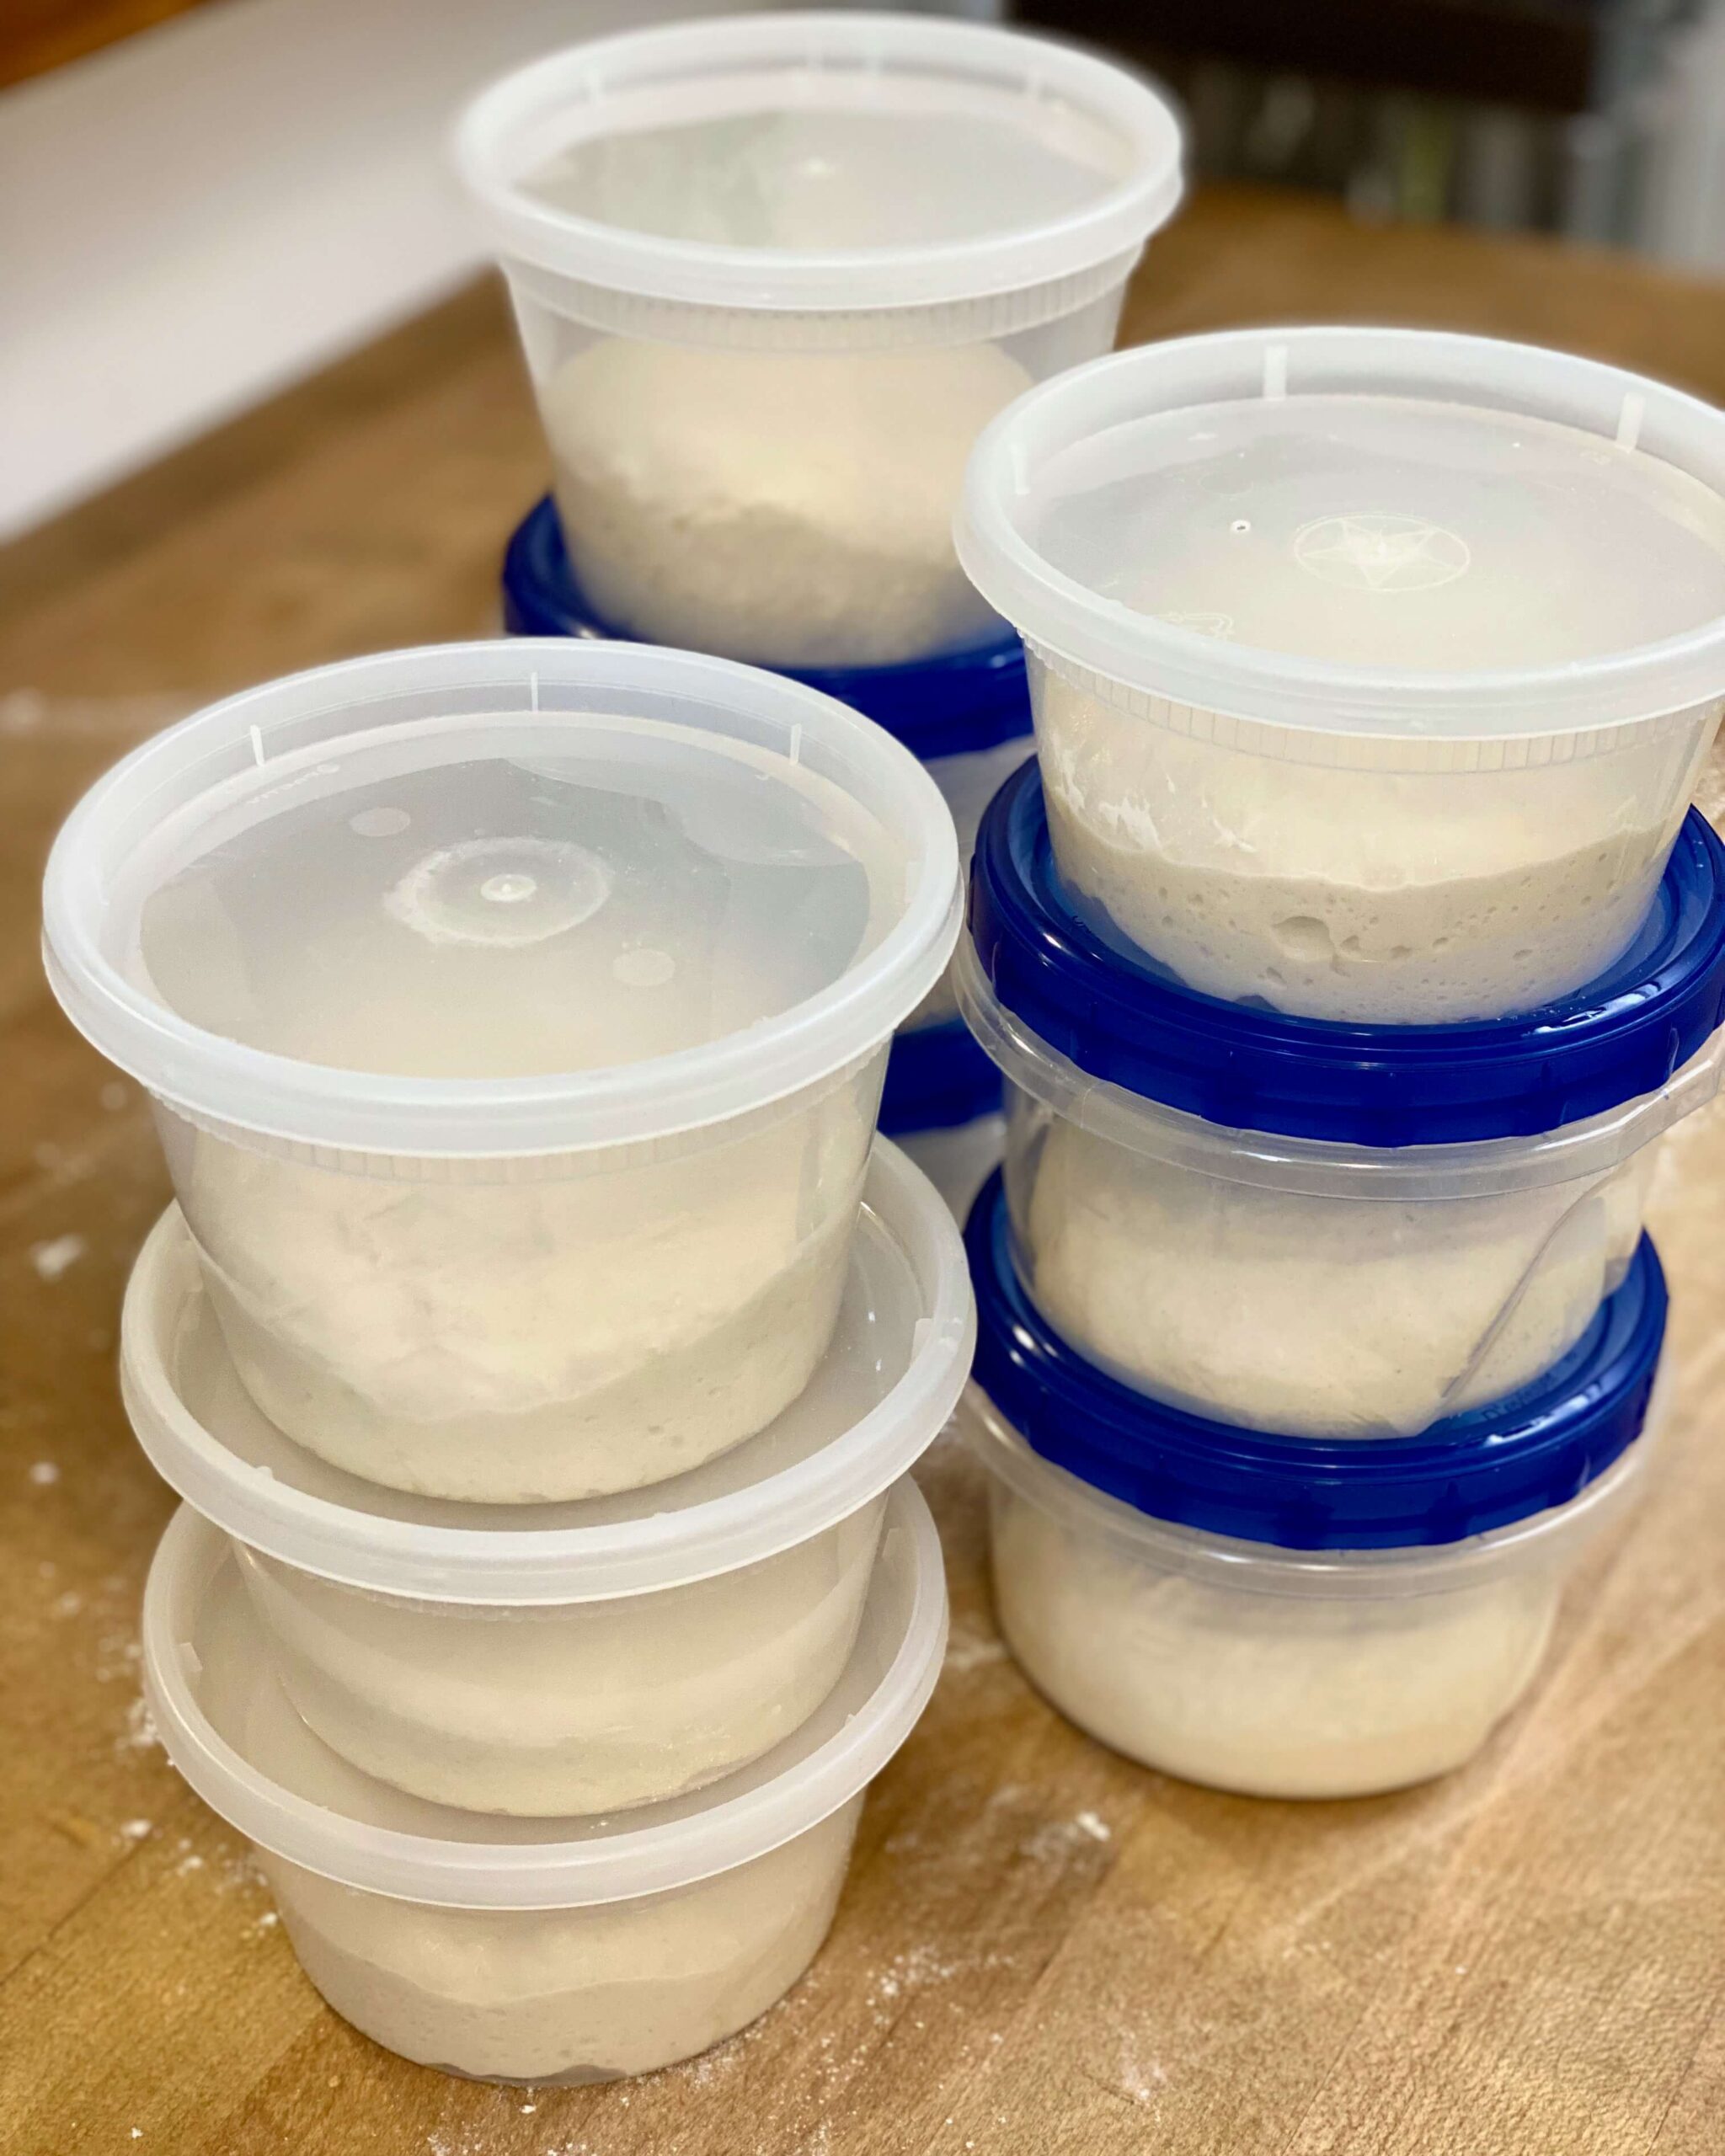 pizza dough prep ahead in plastic containers